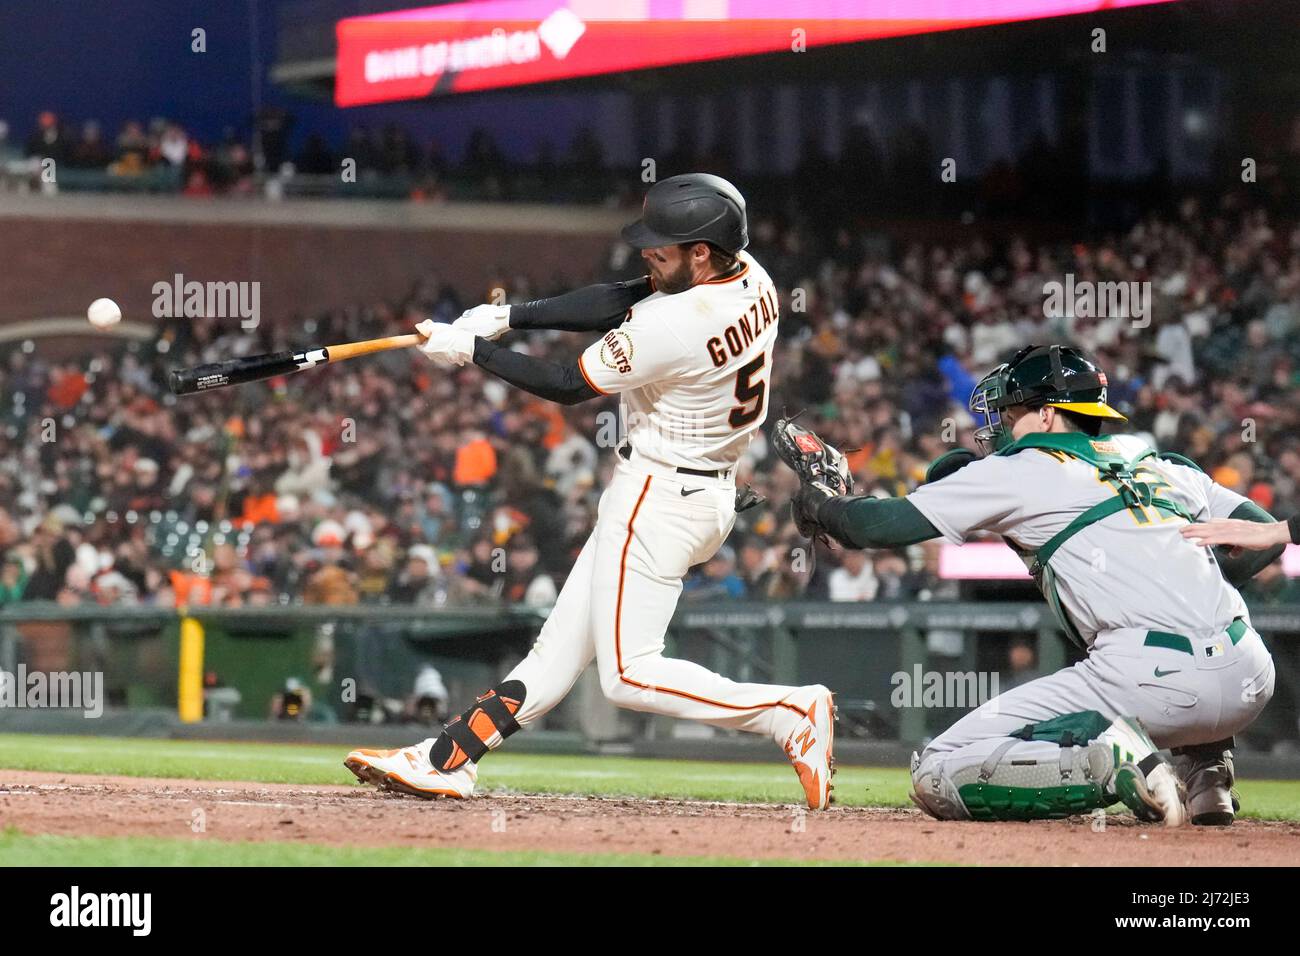 San Francisco Giant outfielder Luis González (51)at bat during MLB regular season game between the Oakland Athletics and San Francisco Giants at Oracl Stock Photo